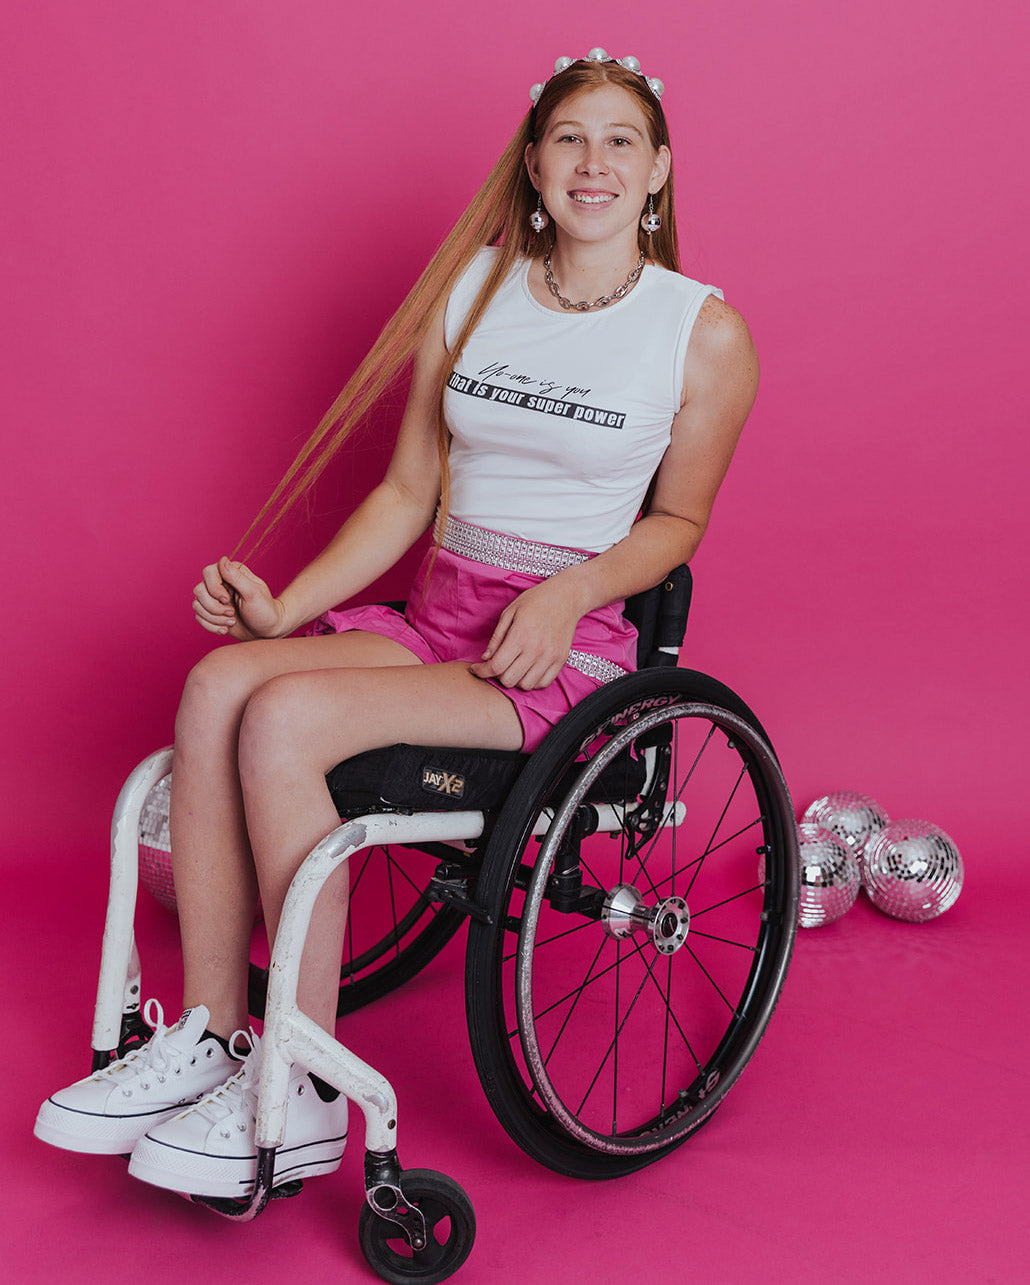 Young white woman with long red hair poses in a wheelchair in front of a pink background. She's holding out a strand of her hair while wearing a pearl headband. She is wearing a sleeveless white shirt, pink cargo shorts with silver embellishments and a high waist, and white sneakers.